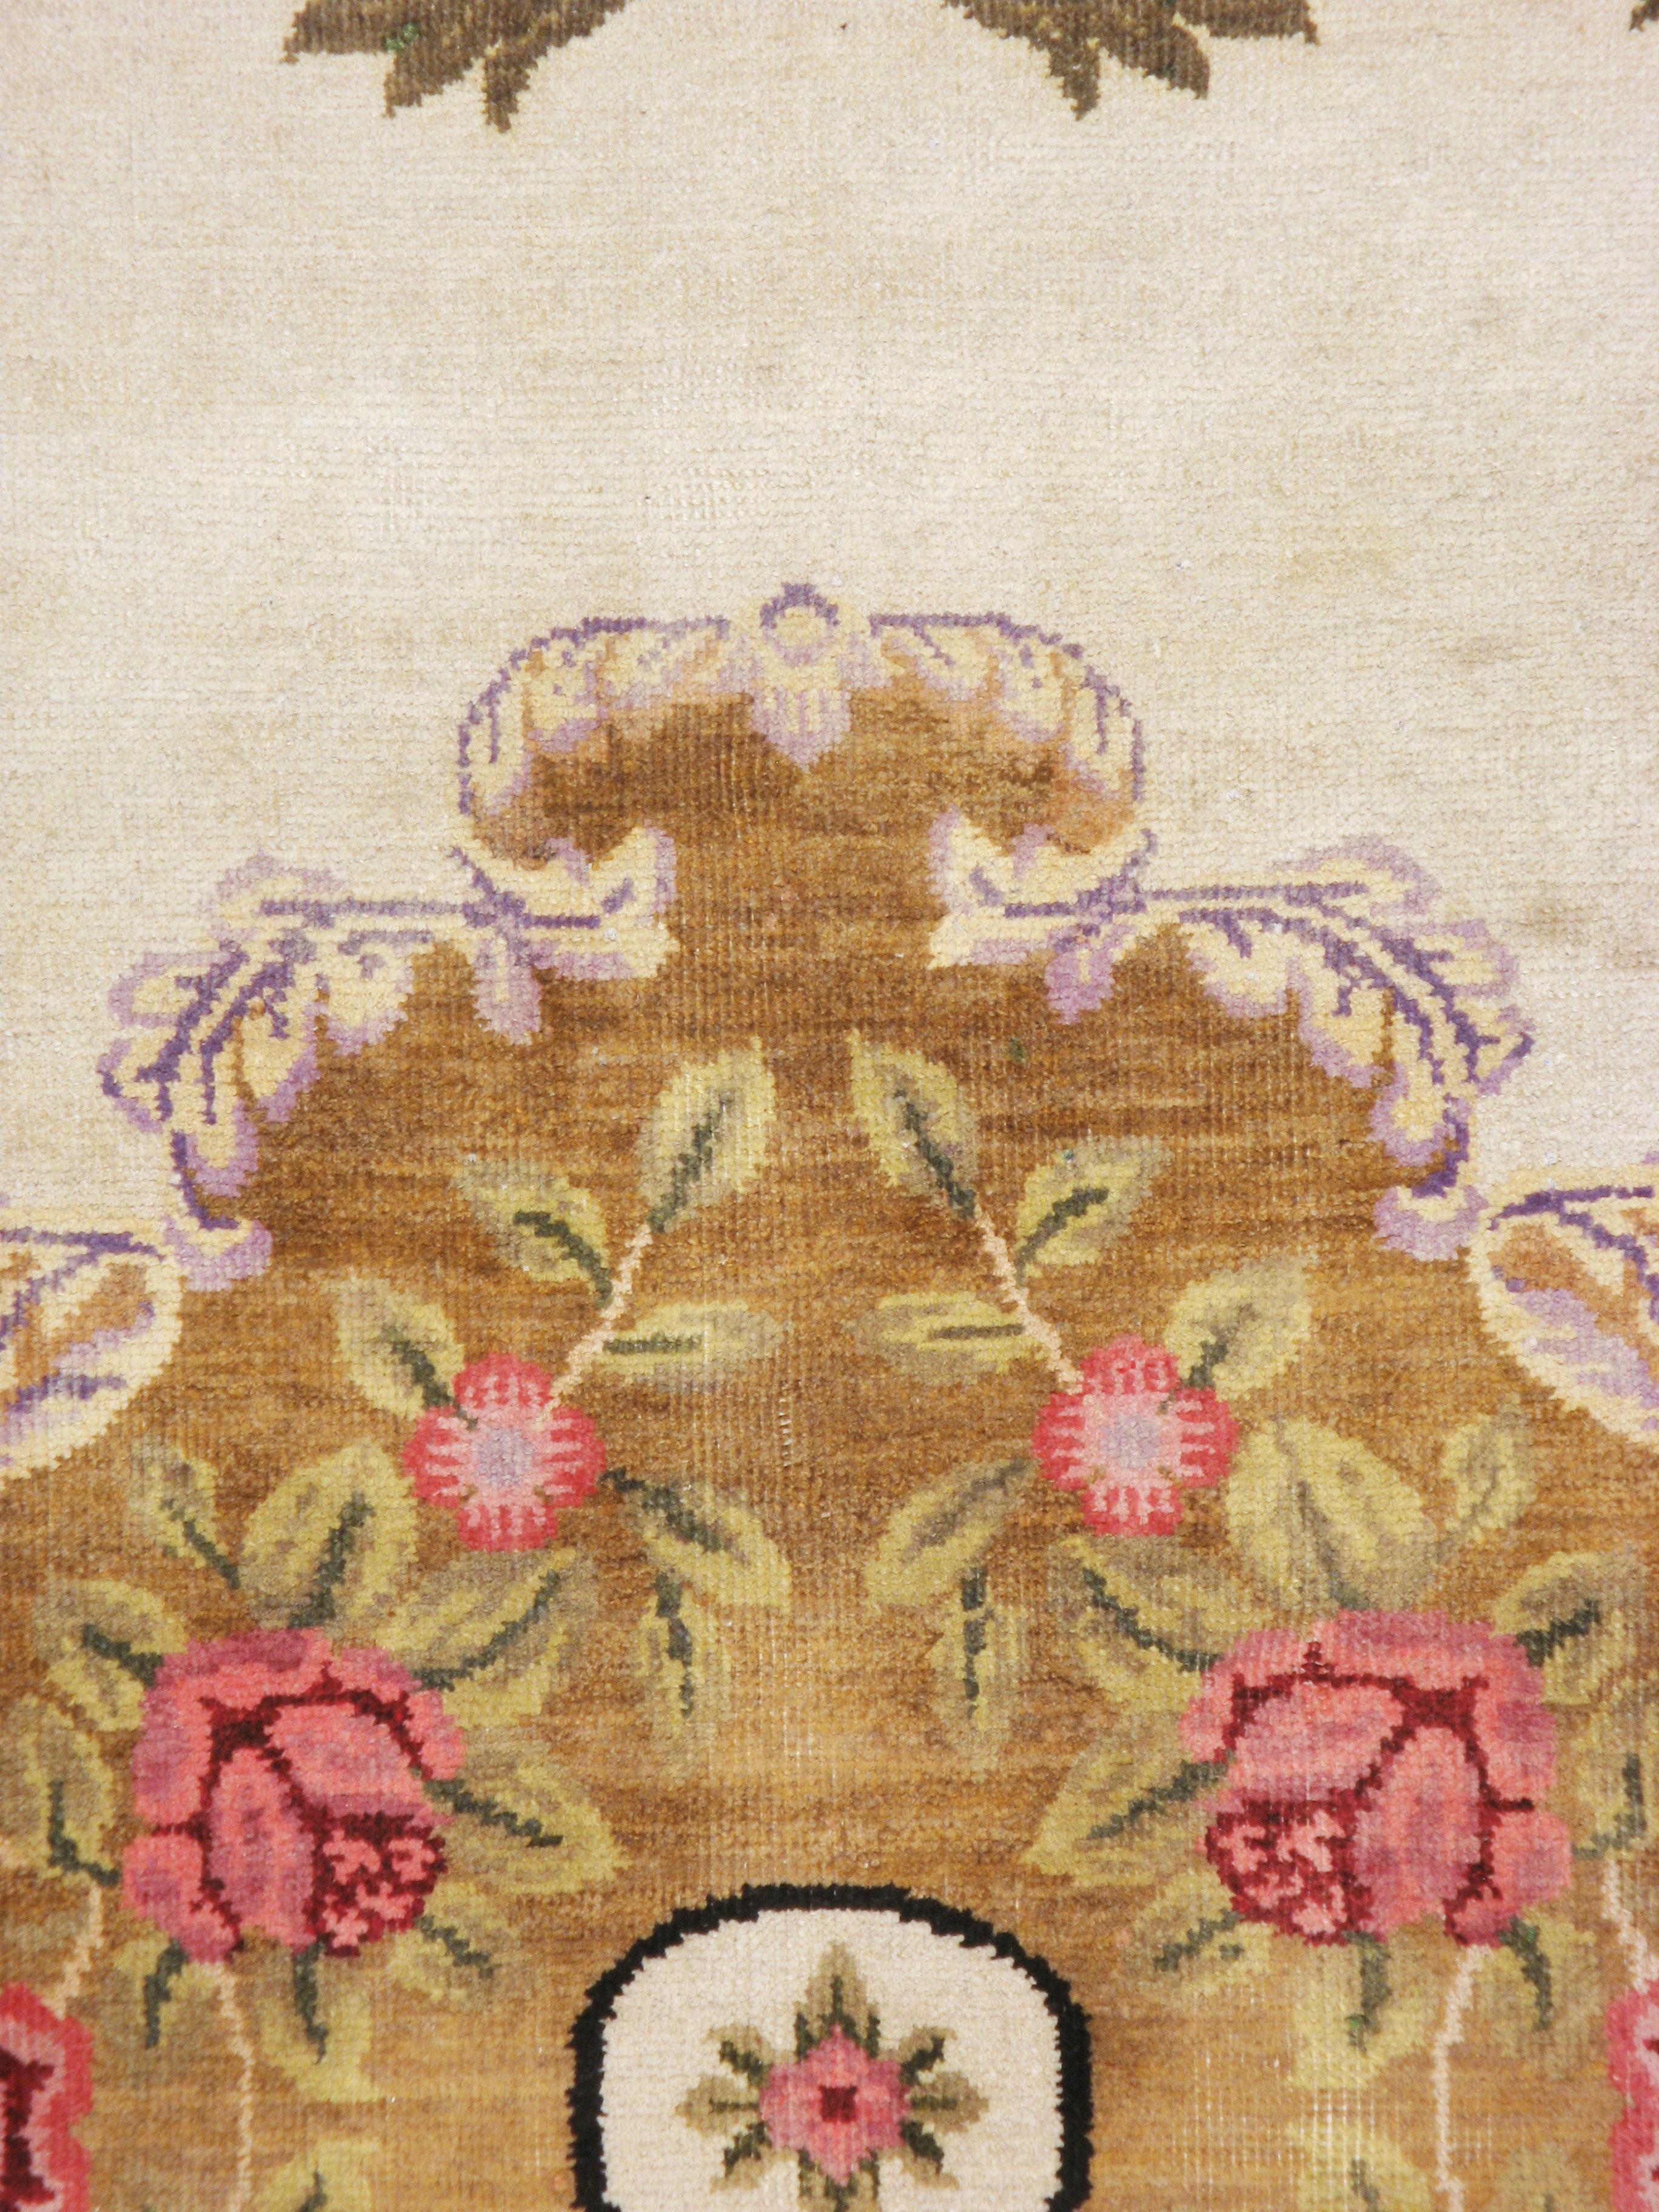 A vintage European continental carpet from the mid-20th century. A large golden brown medallion of roses populates the ivory field. A brown border is edged off by acanthus scroll leaves in shades of green.